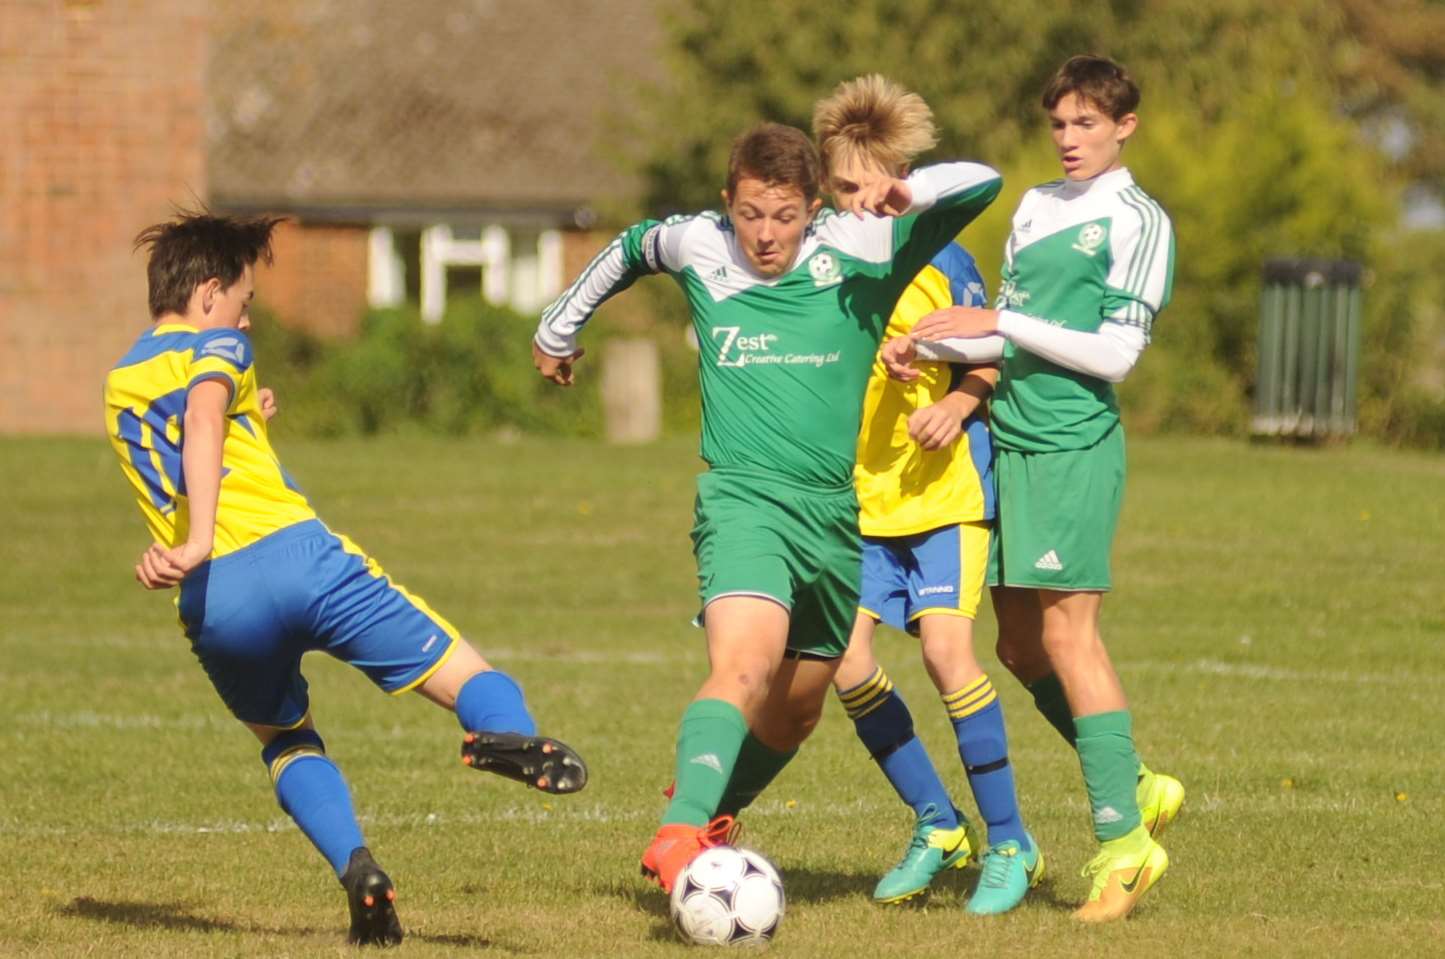 Strood 87 and Eagles show commitment in Under-15 Division 1 Picture: Steve Crispe